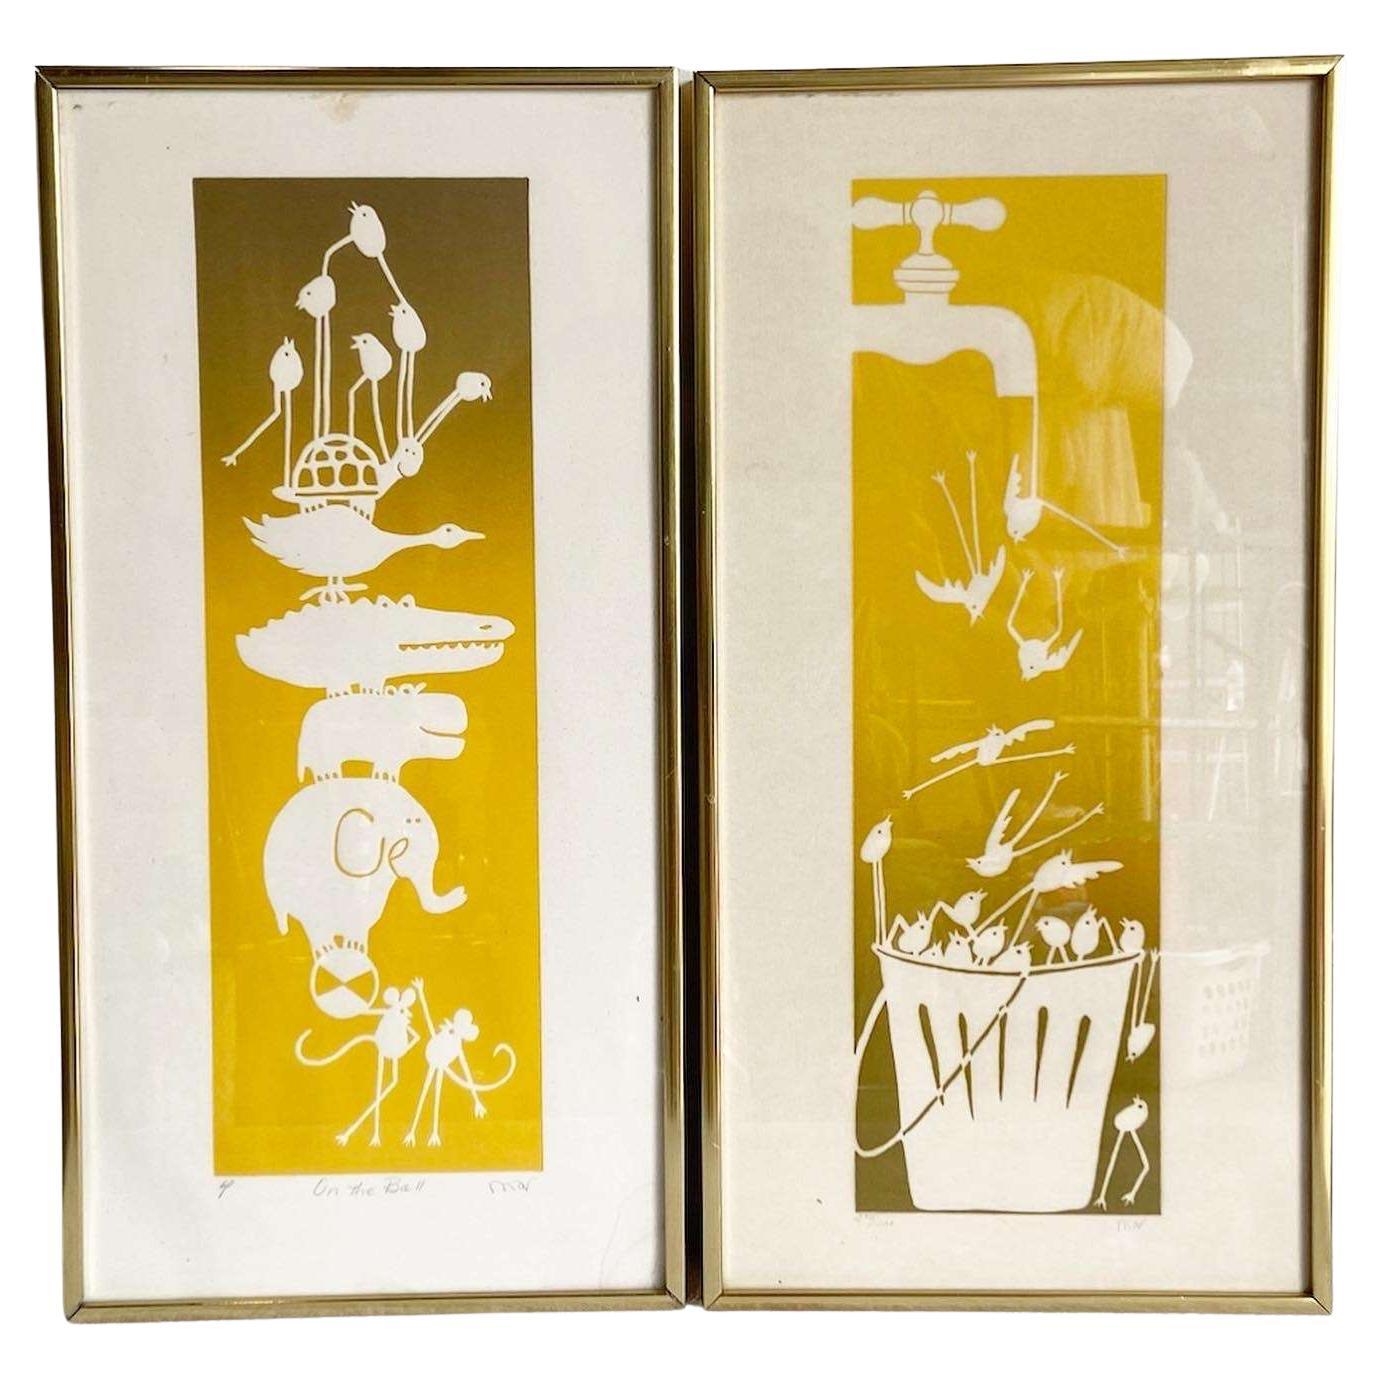 Mid Century Modern Signed and Framed Lithographs by Mar - a Pair